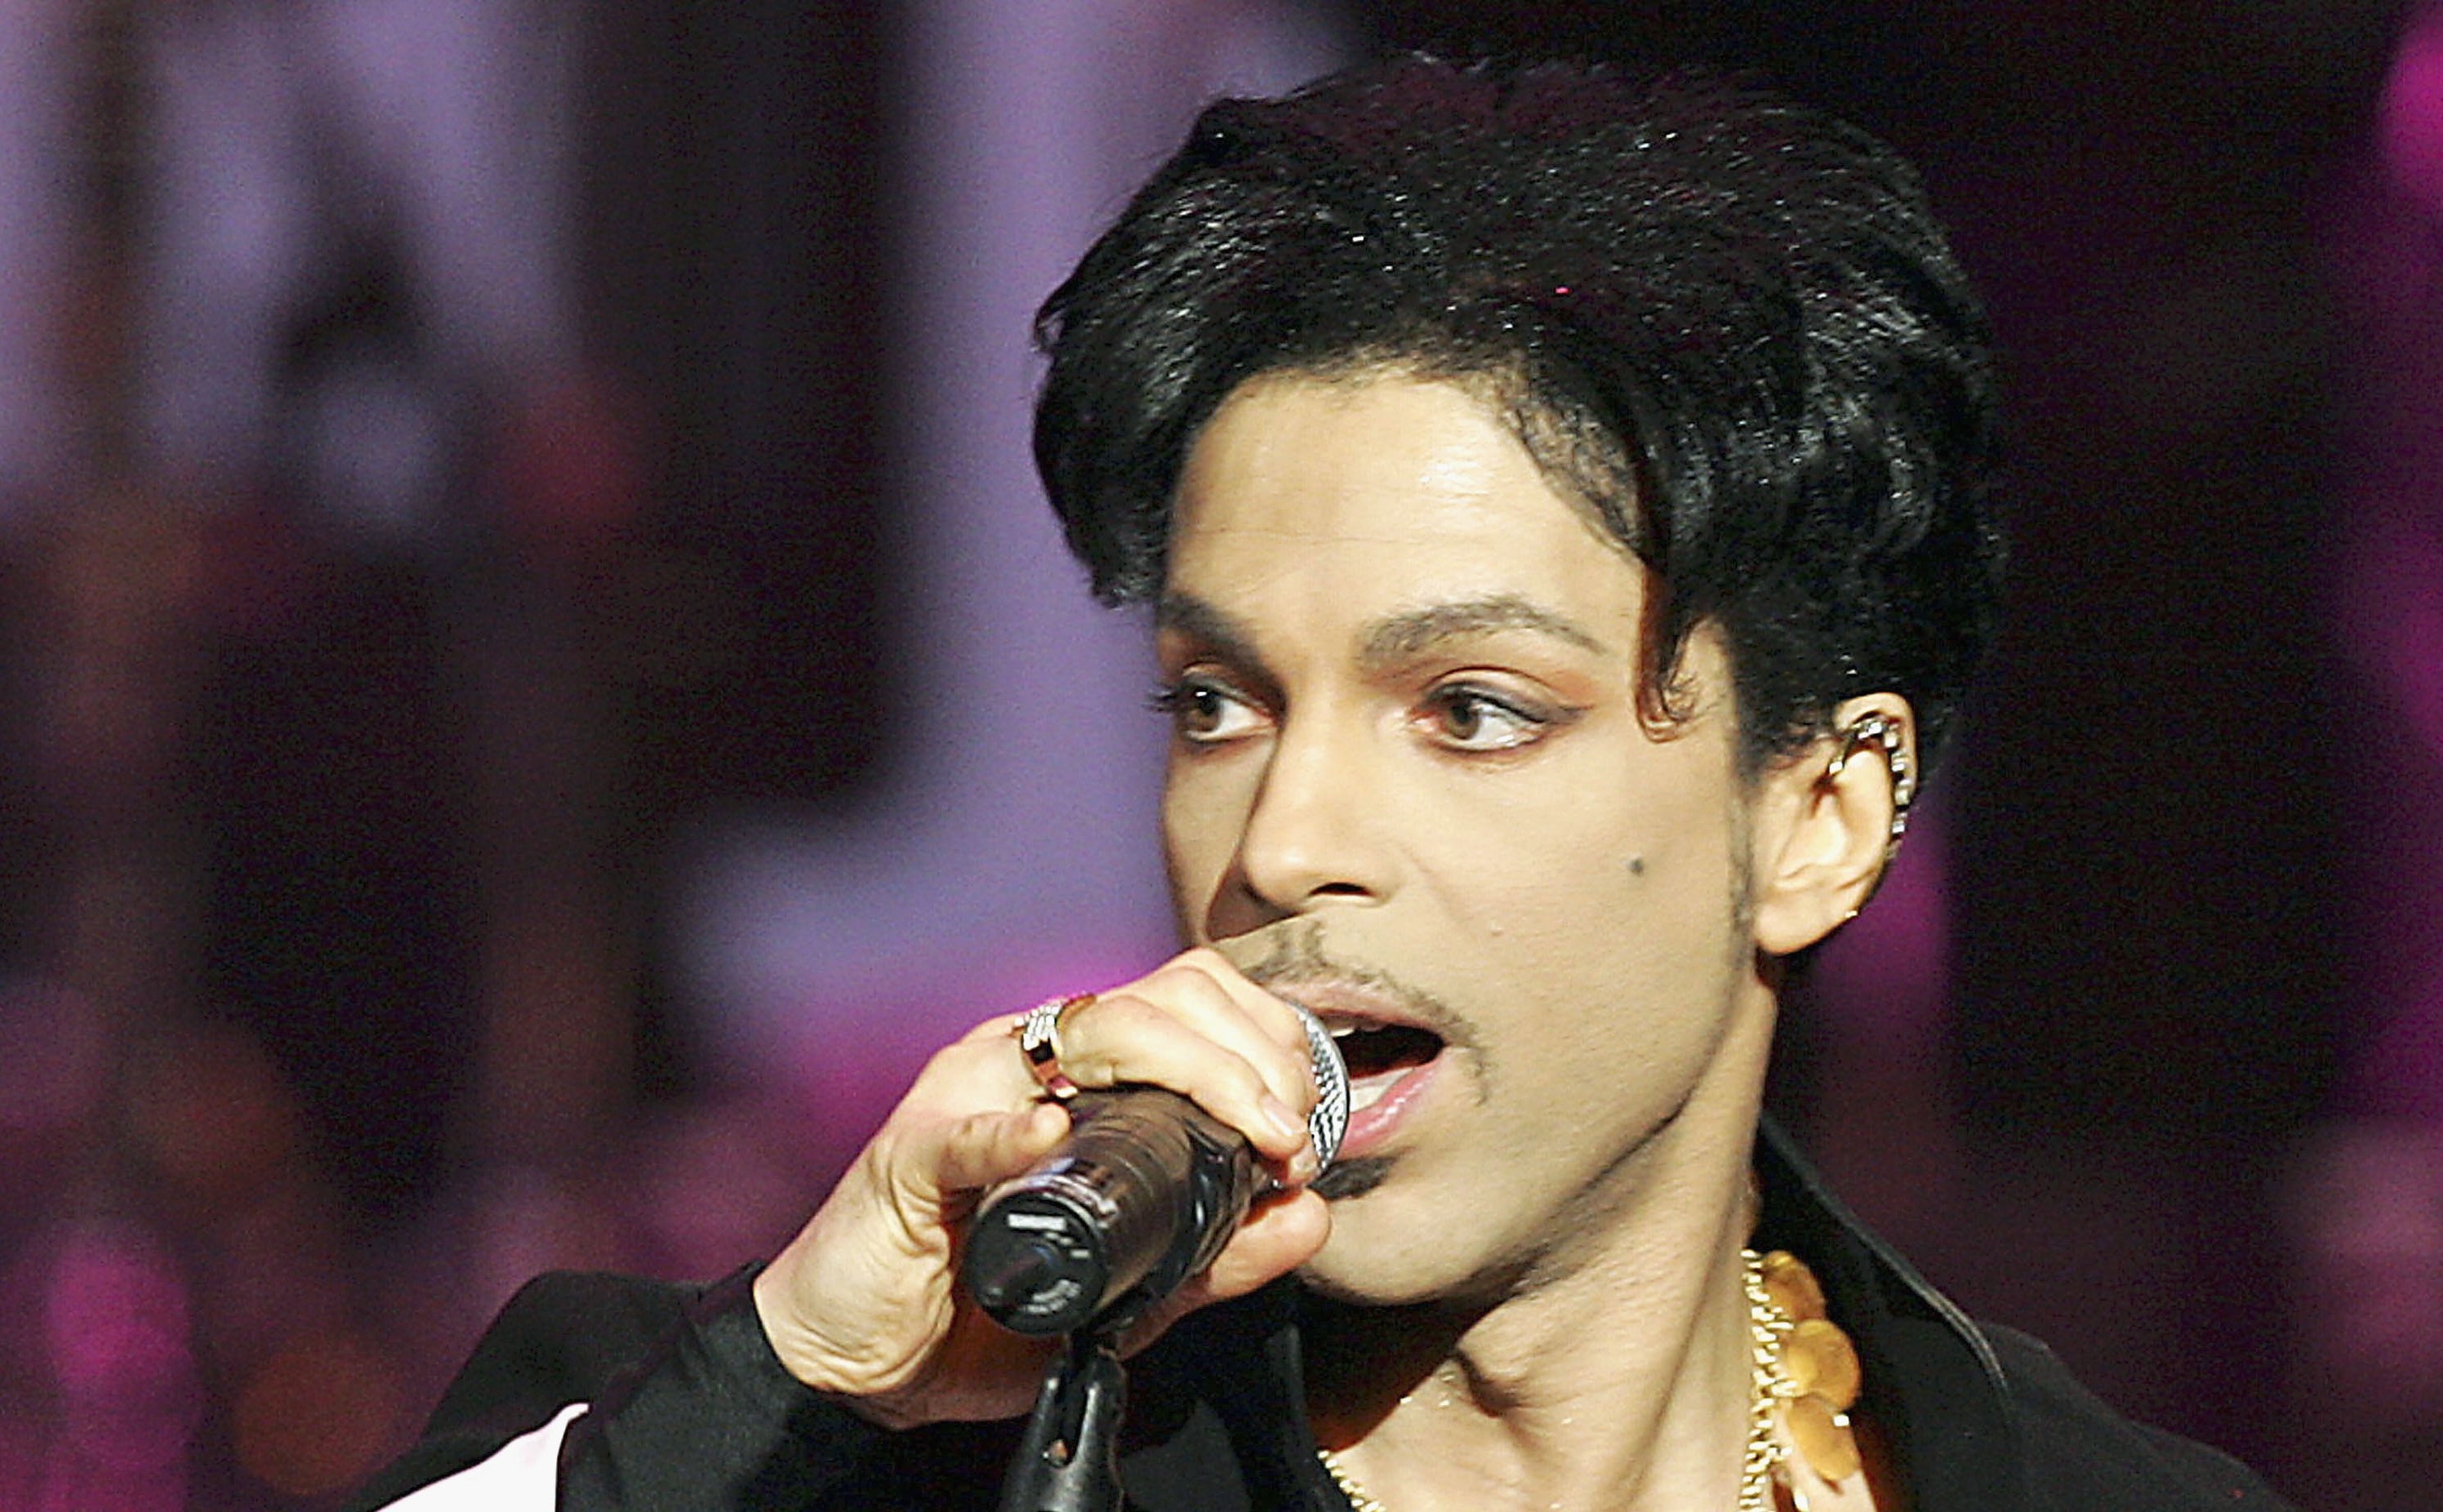 Police are investigating the circumstances around Prince's death.